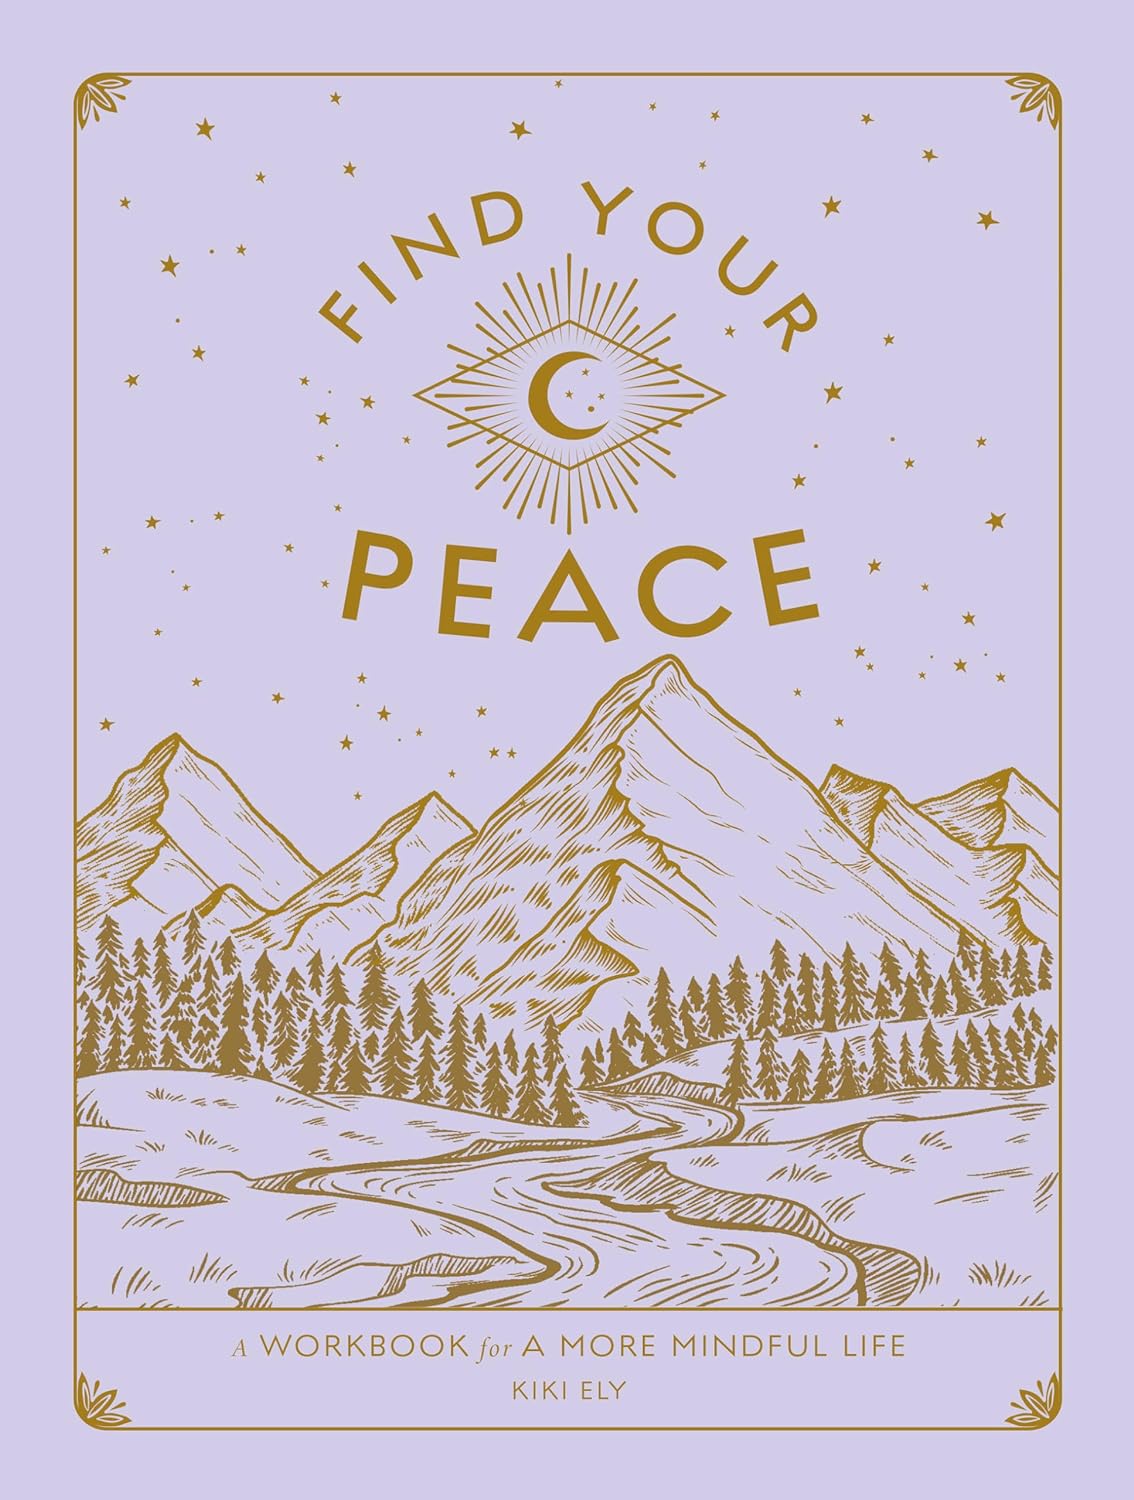 Find Your Peace  - A Workbook for a More Mindful Life